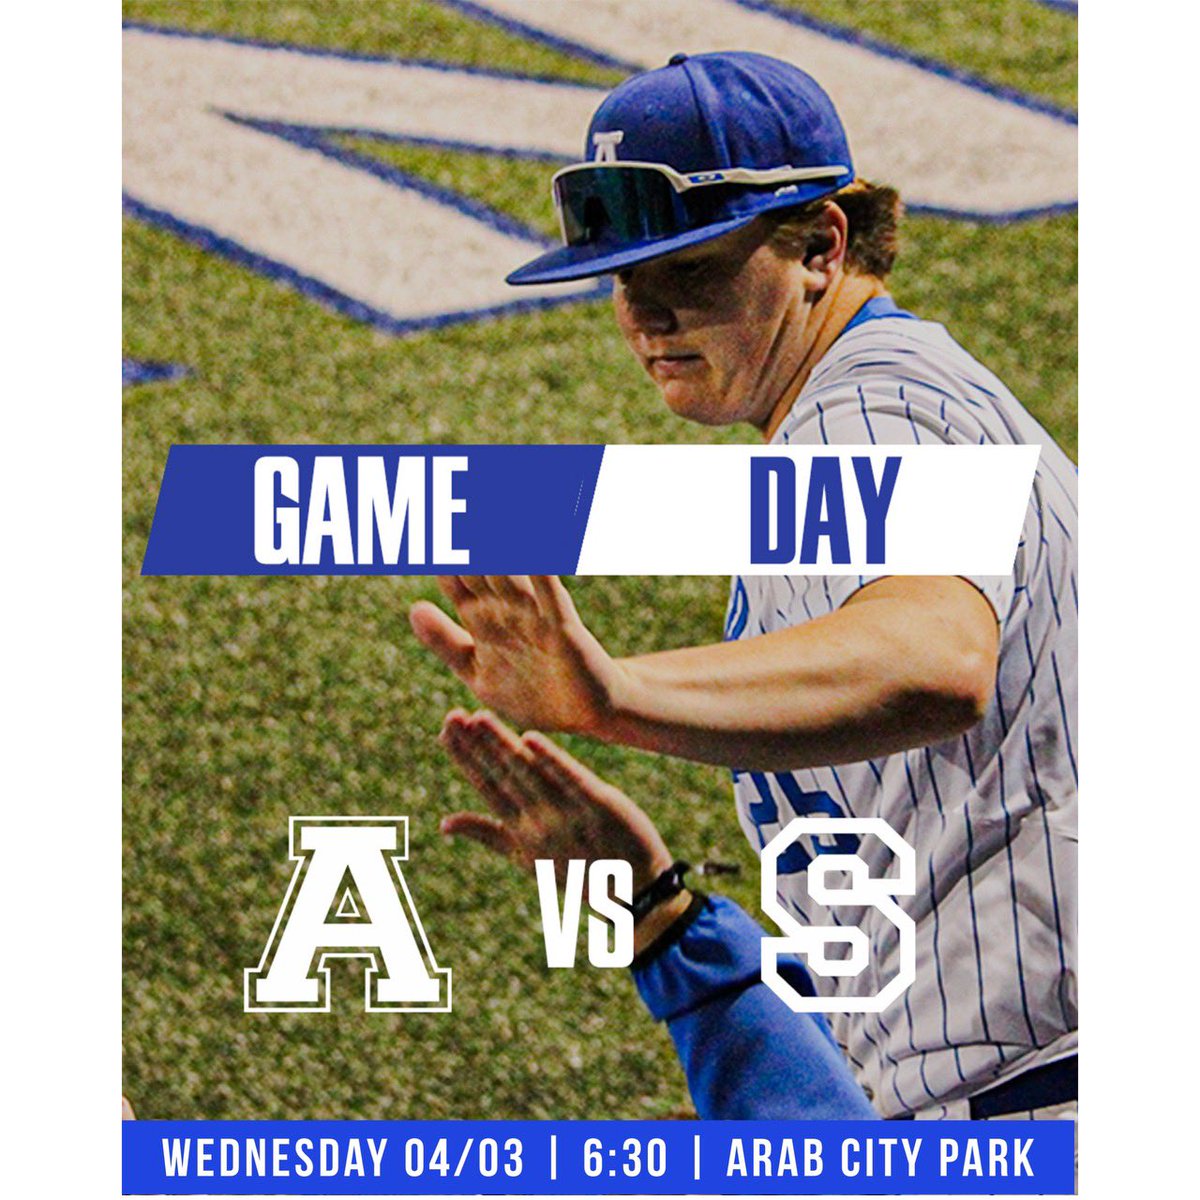 Big Area Series with @shsbaseball4 starts tonight! Come out and support the Knights!